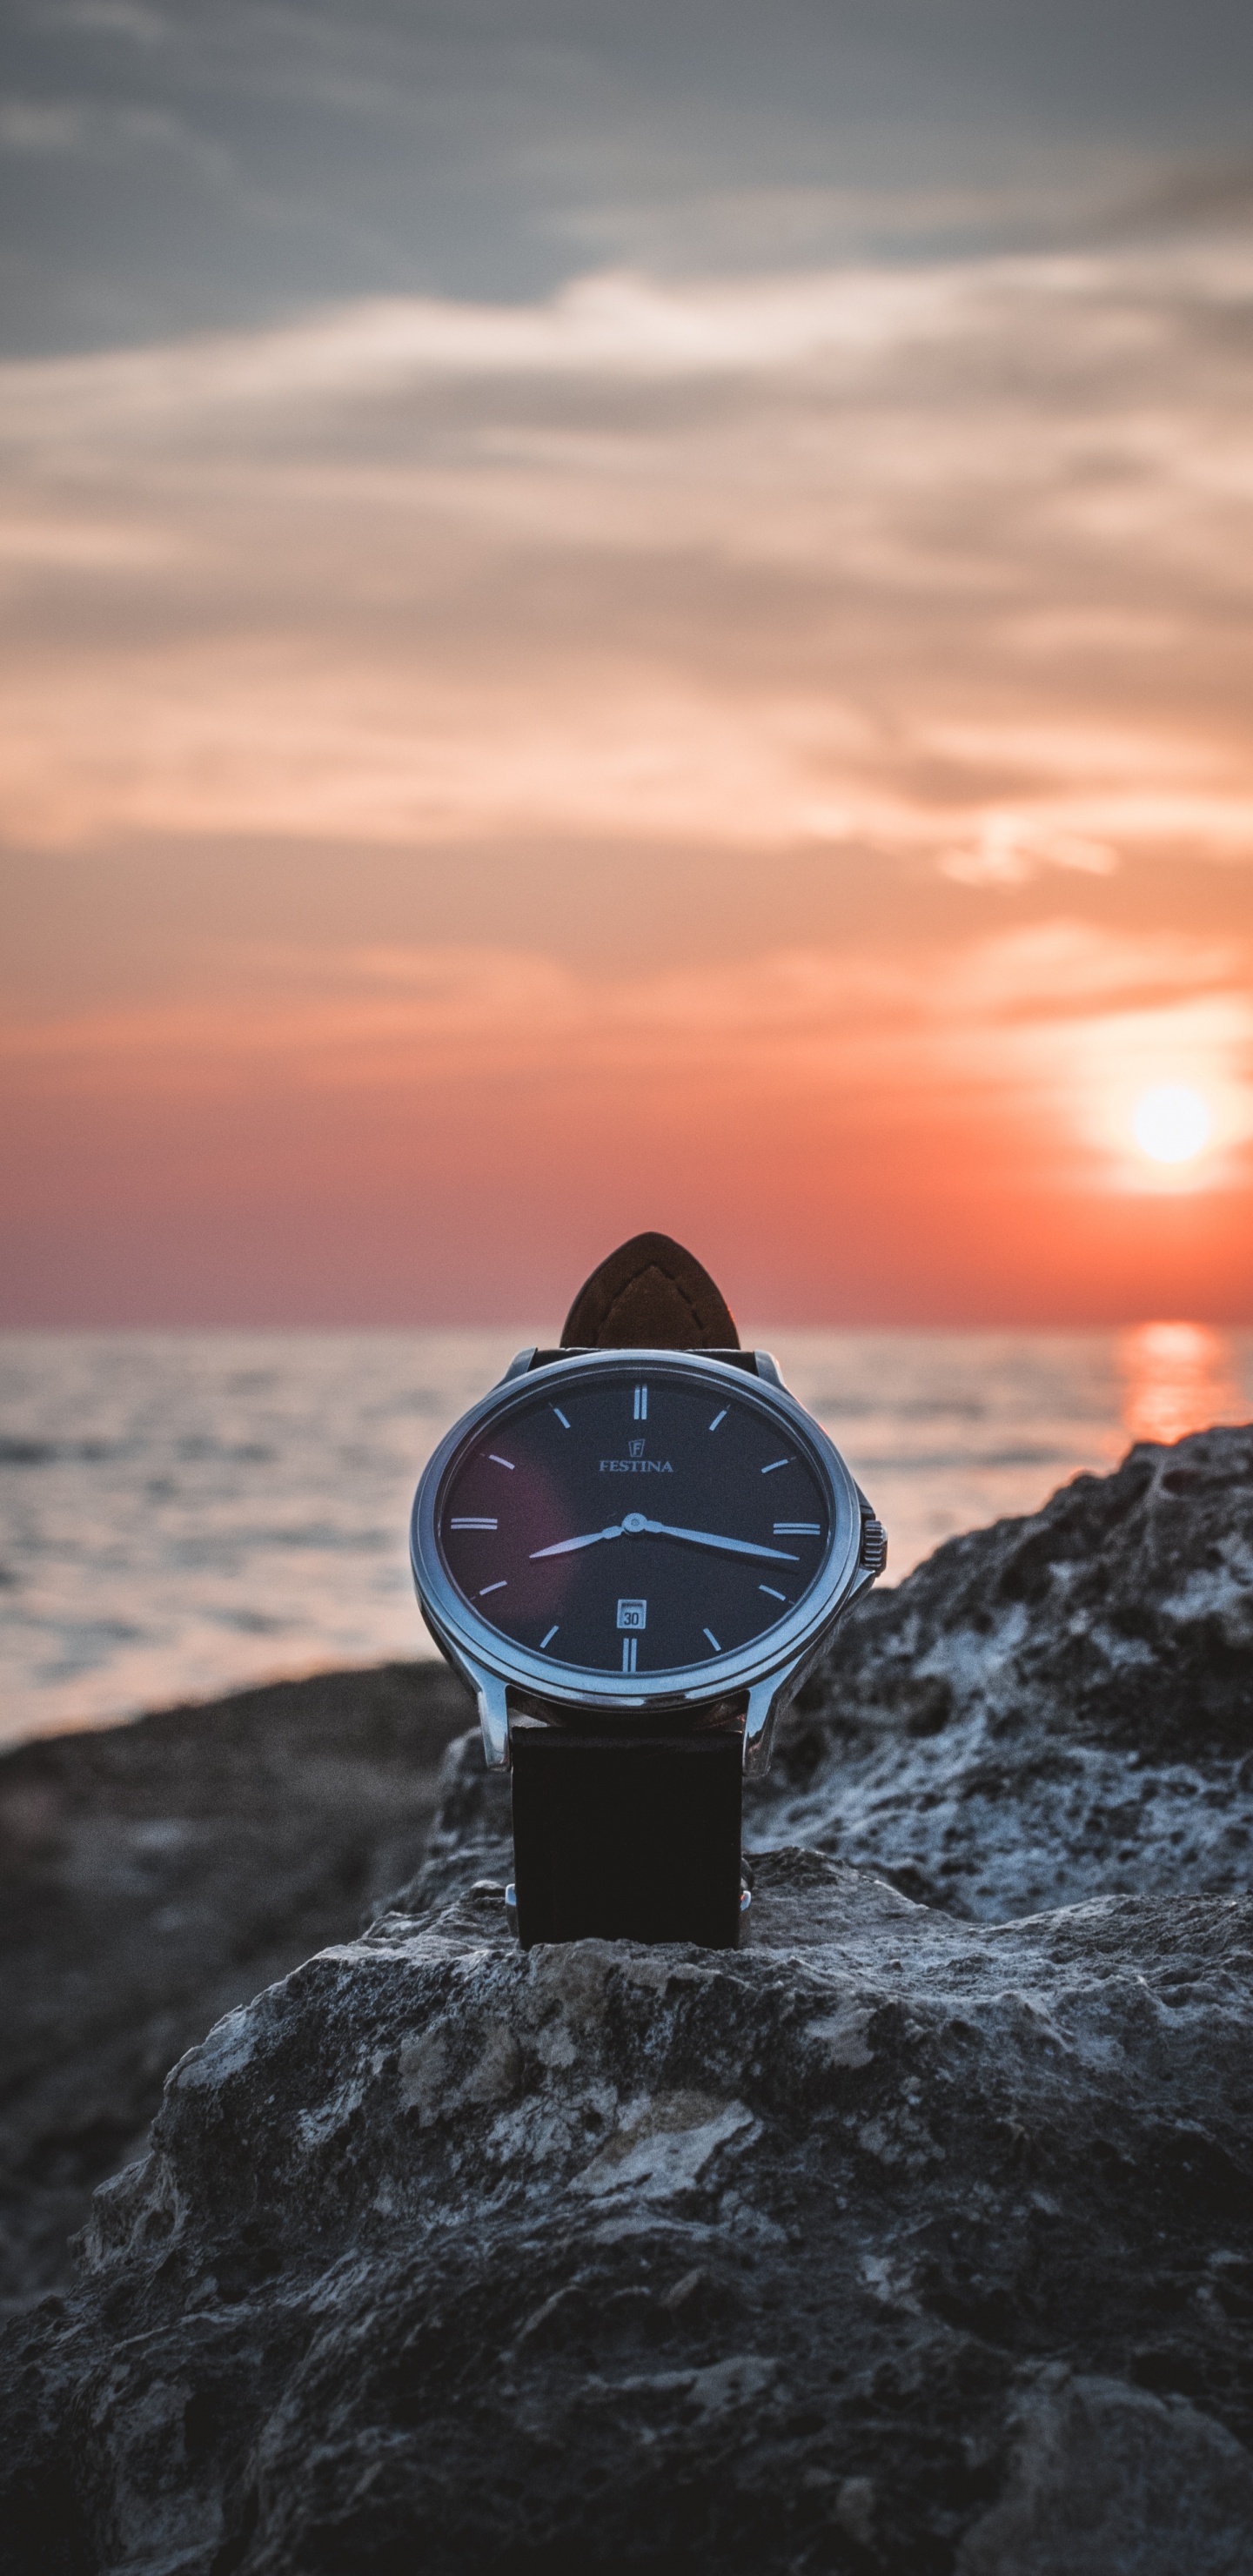 Black and White Analog Watch on Gray Rock Near Sea During Sunset. Wallpaper in 1440x2960 Resolution